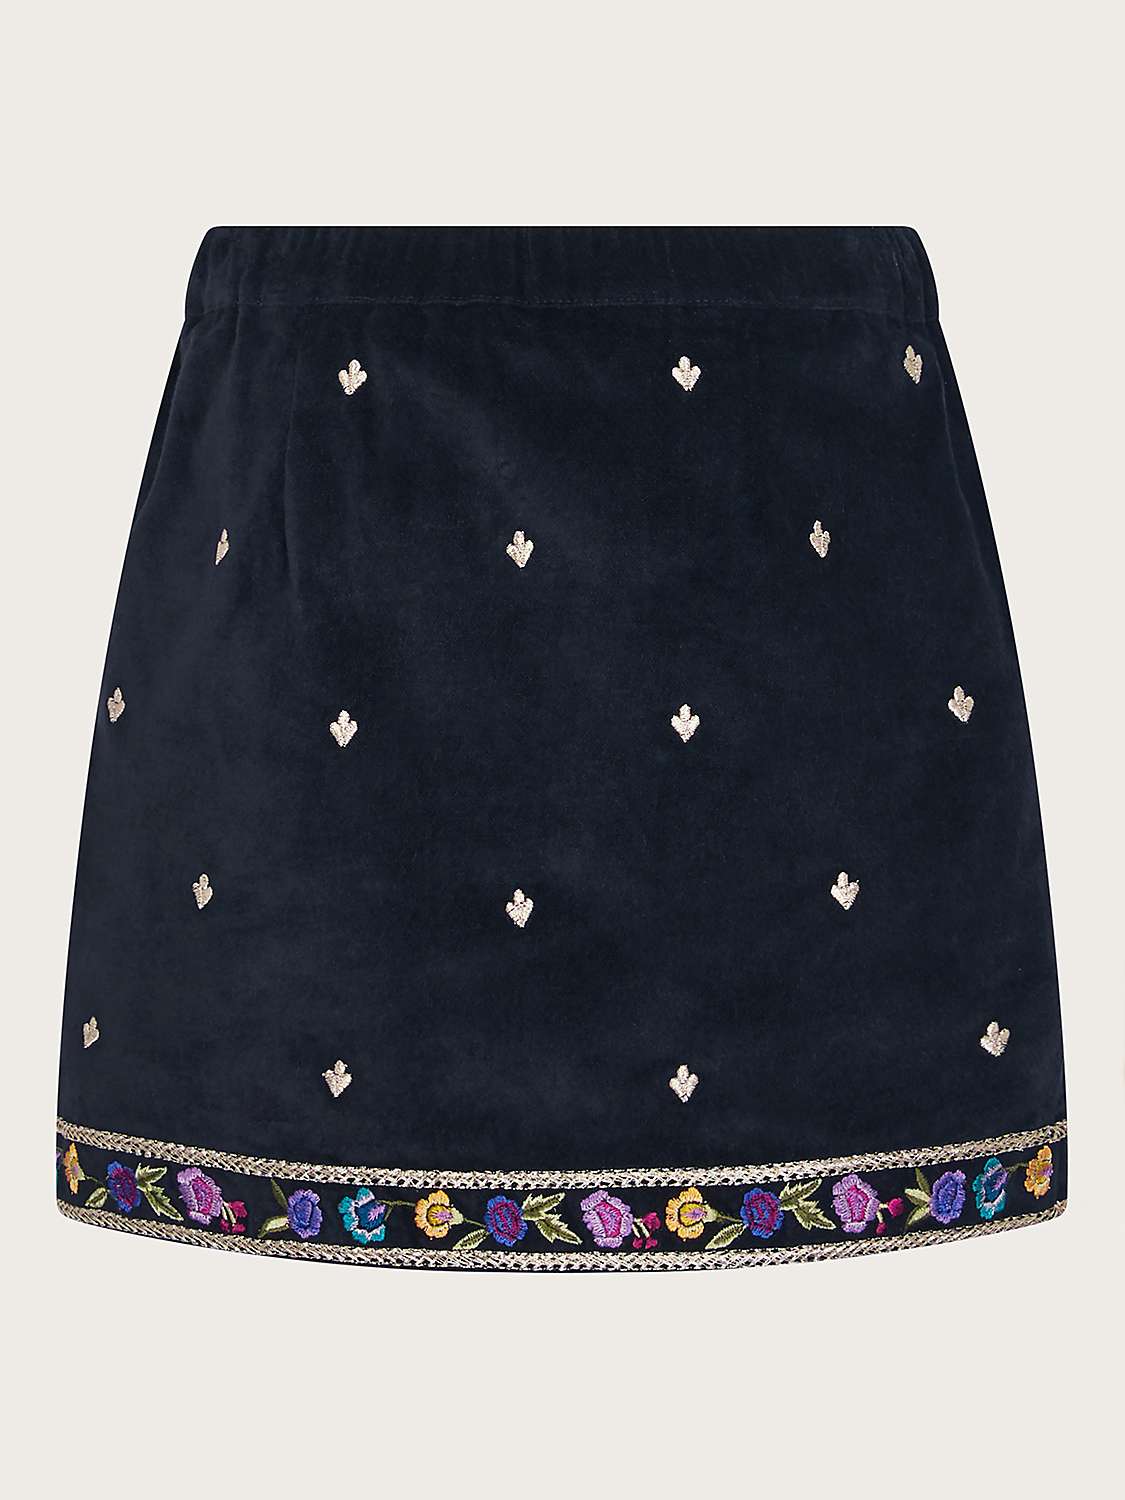 Buy Monsoon Kids' Boutique Embroidered Mini Skirt, Multi Online at johnlewis.com